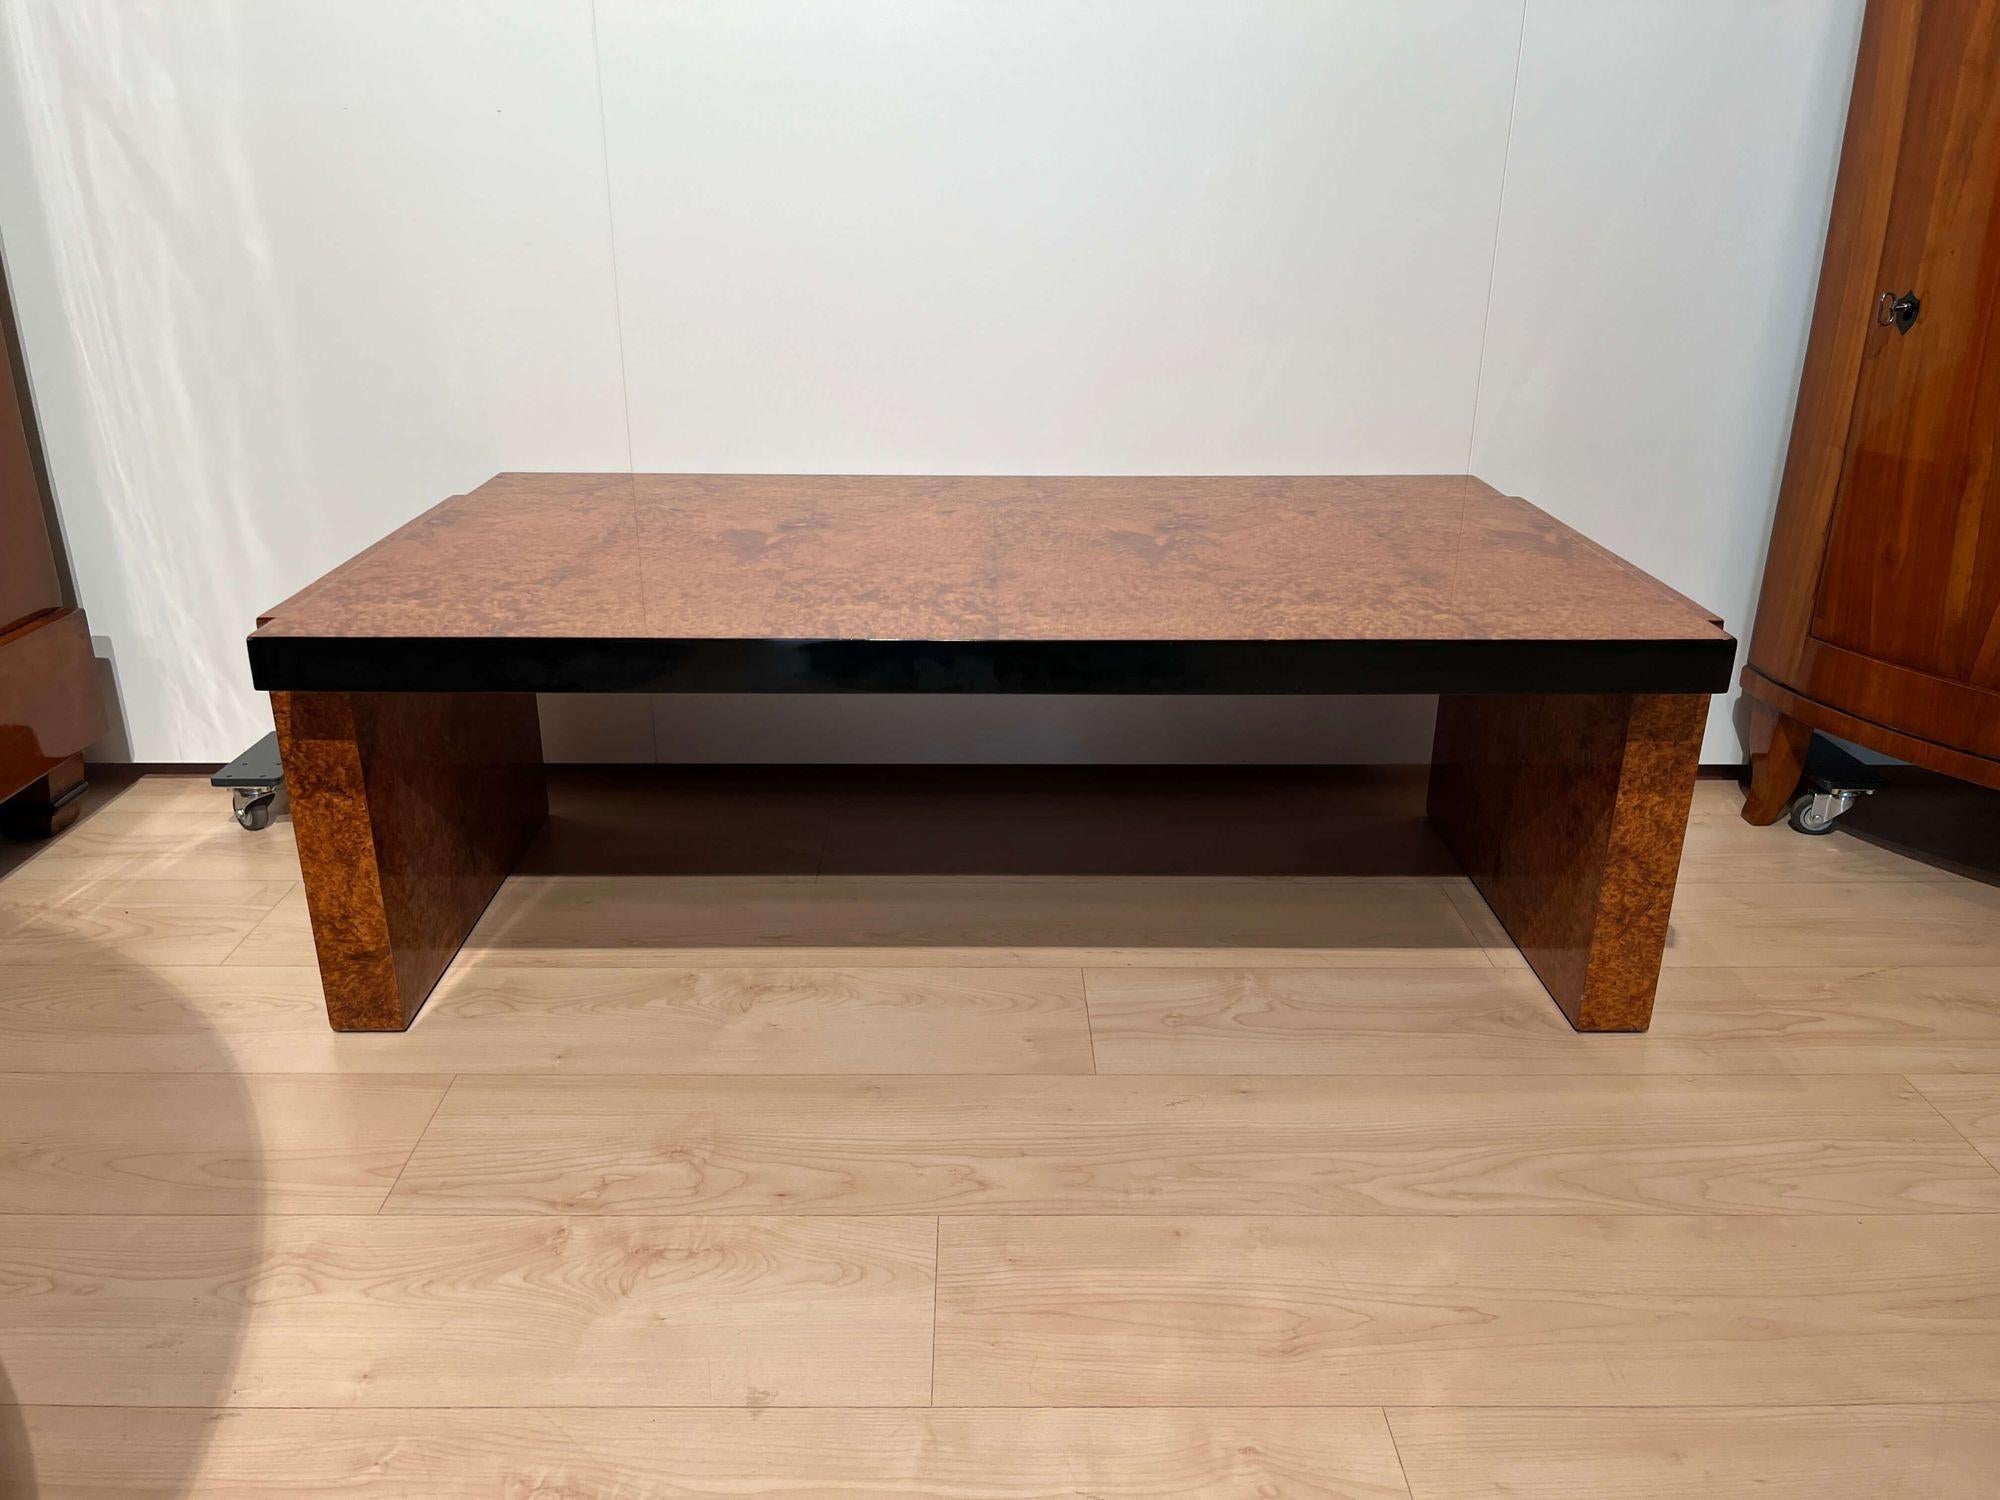 Low rectangular art deco sofa of coffee table from France about 1930.
Amboyna roots wood veneered and lacquered. Black lacquered at the edges.
Dimensions: H 40, 5 cm x W 122 cm x D 68 cm.